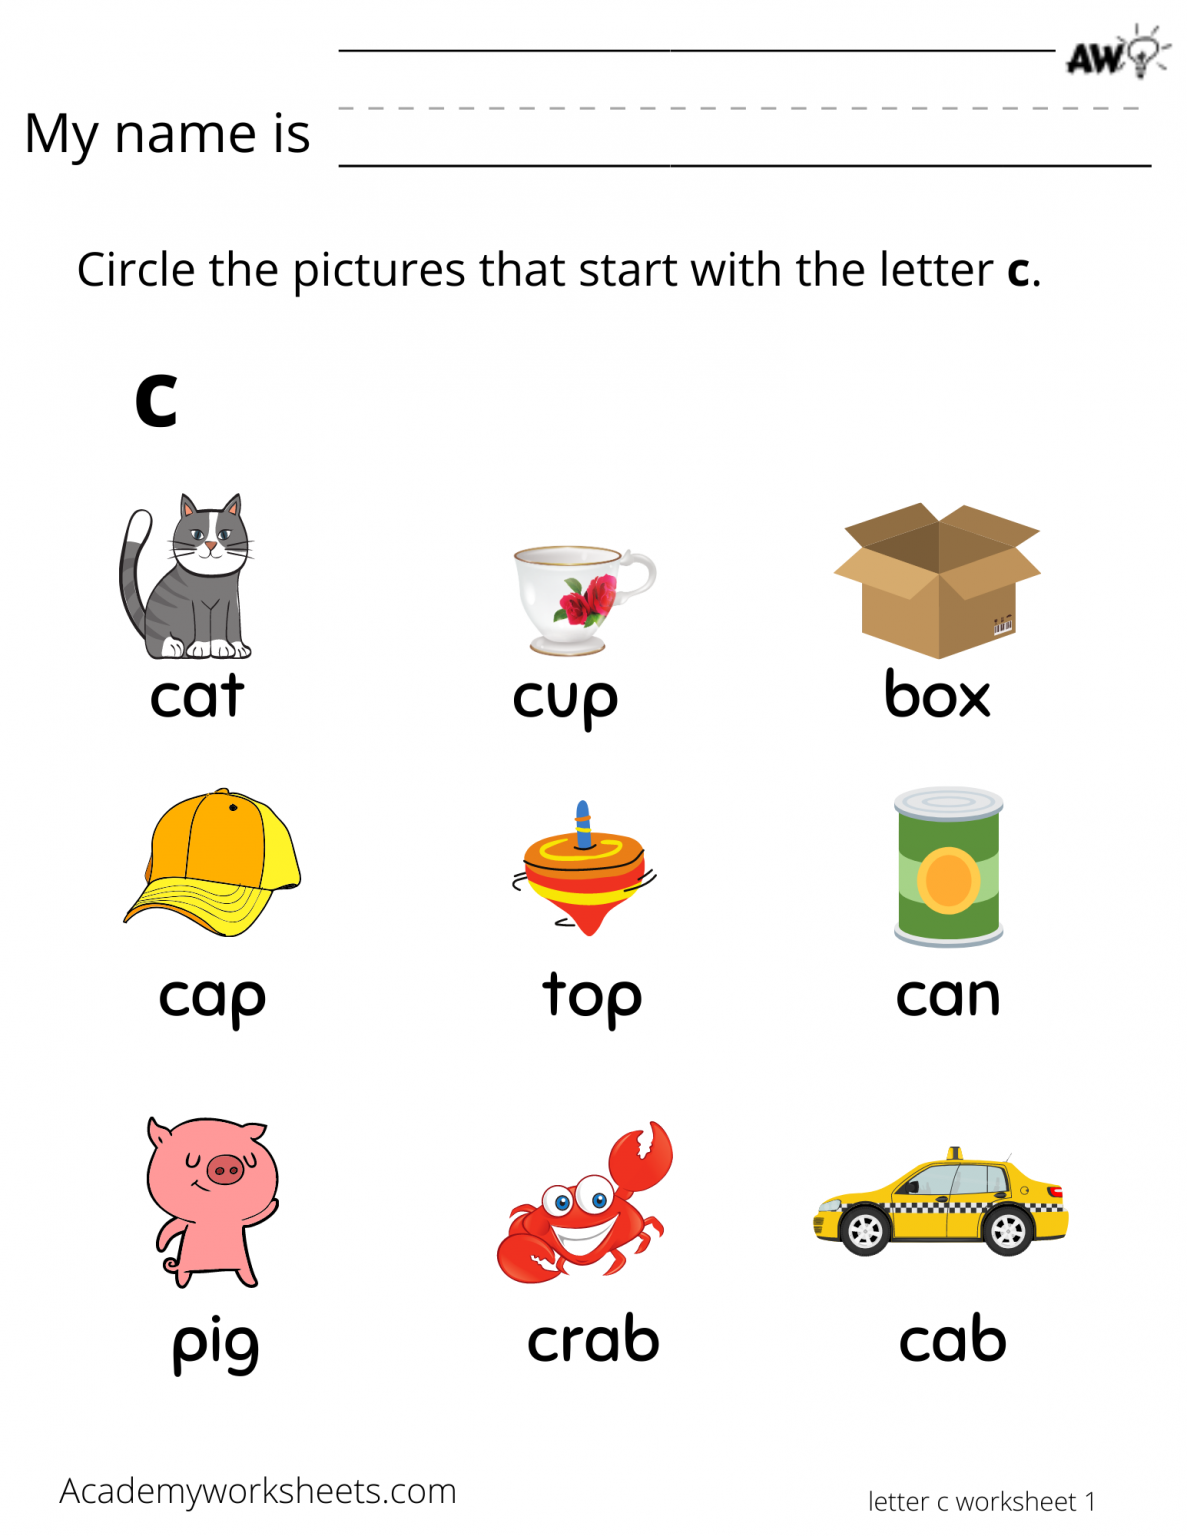 Learn the Letter C - worksheets - Academy Worksheets